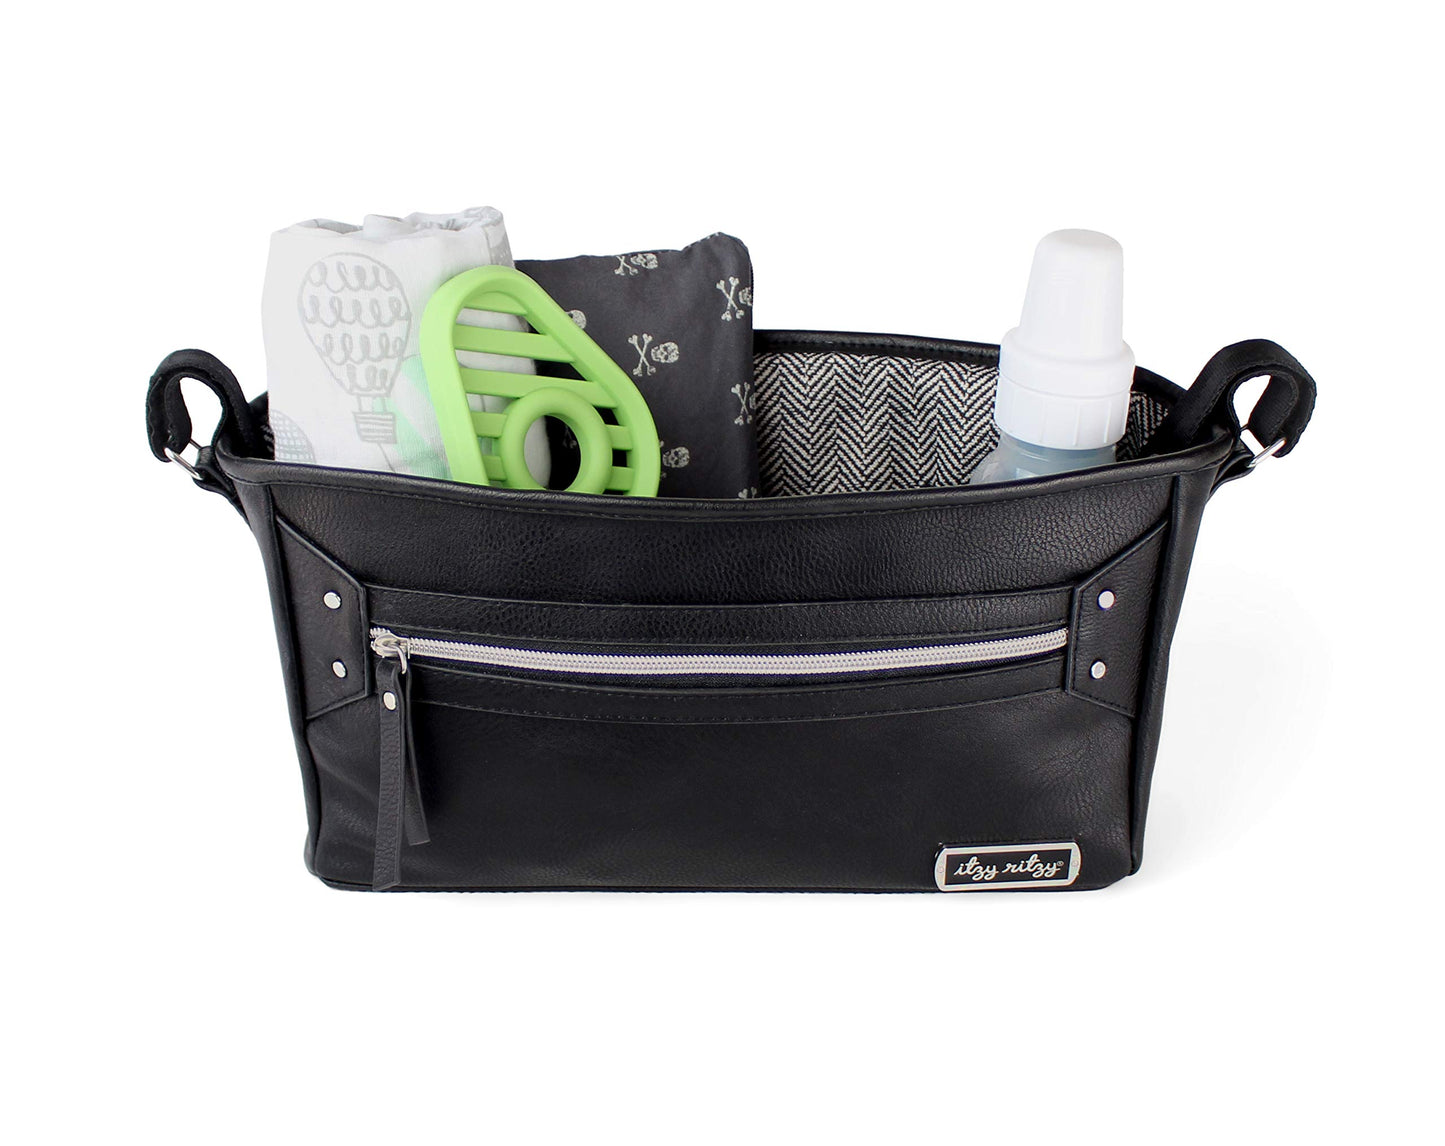 Itzy Ritzy Adjustable Stroller Caddy / Organizer - Stroller Organizer Bag Featuring Front Zippered Pocket, 2 Built-In Interior Pockets & Adjustable Straps to Fit Nearly Any Stroller (Coffee and Cream)